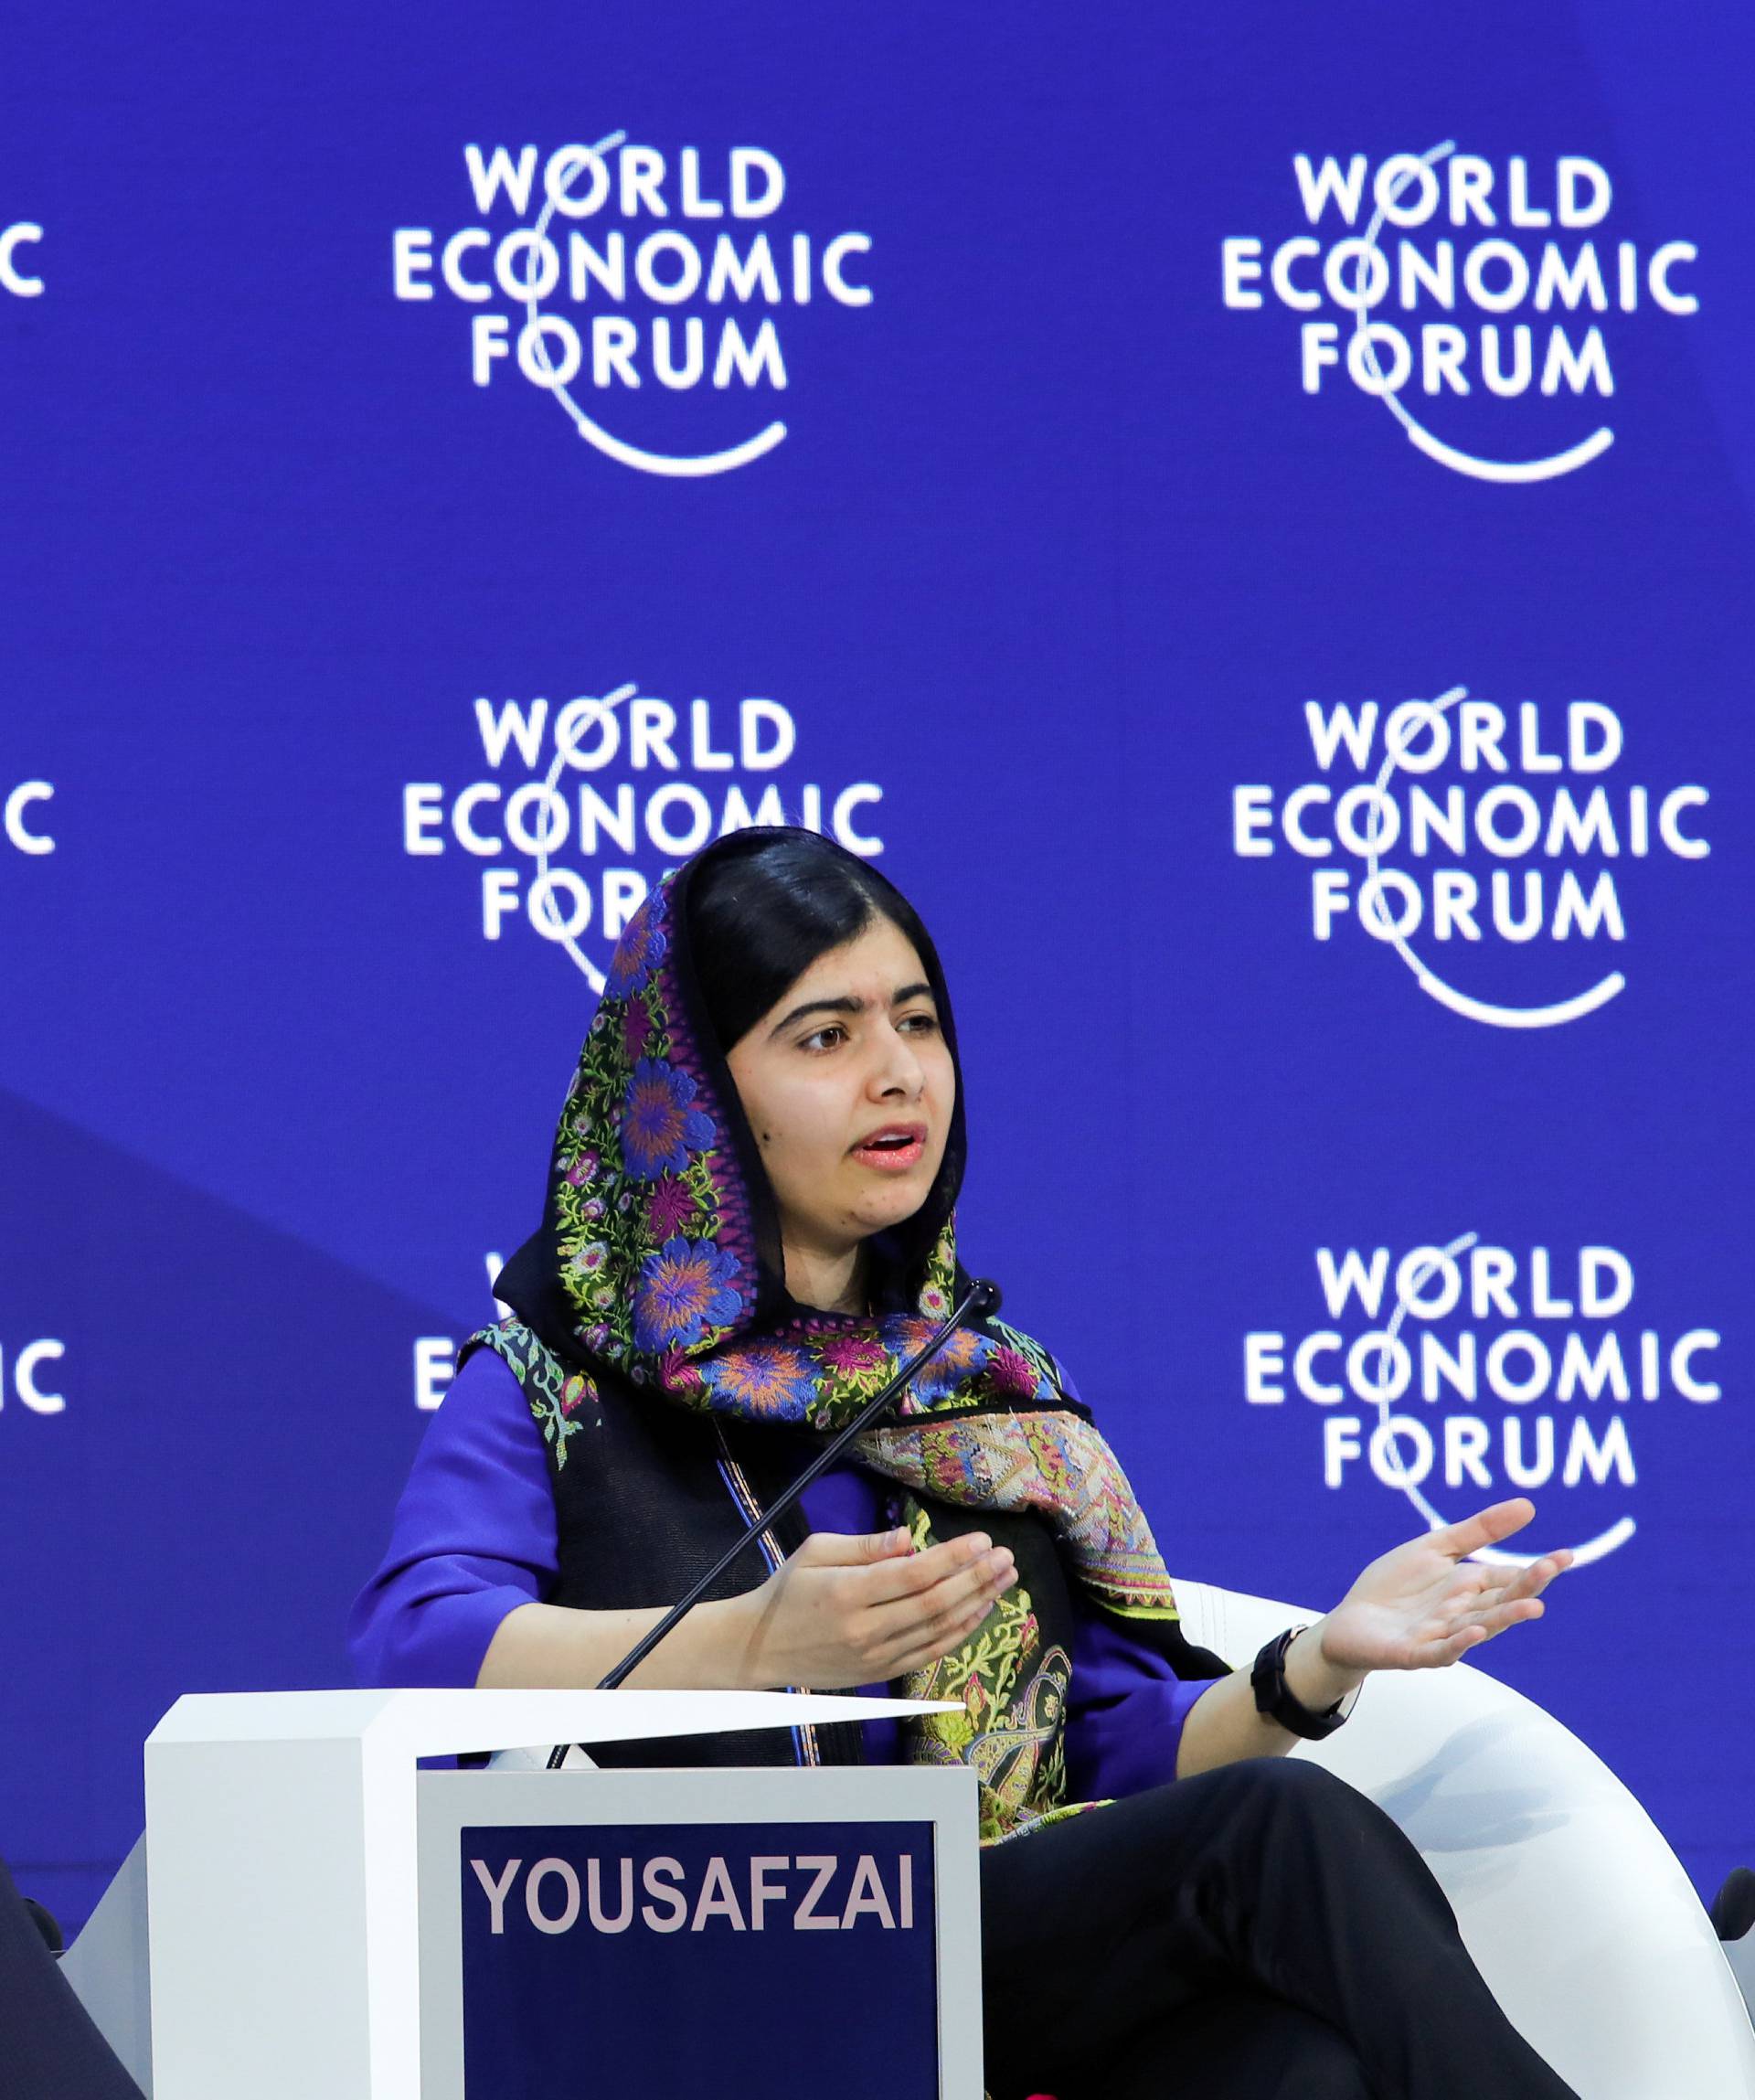 Canada's Prime Minister Justin Trudeau and Malala Yousafzai, Girls' Education Activist and Co-Founder of Malala Fund, attend the World Economic Forum (WEF) annual meeting in Davos